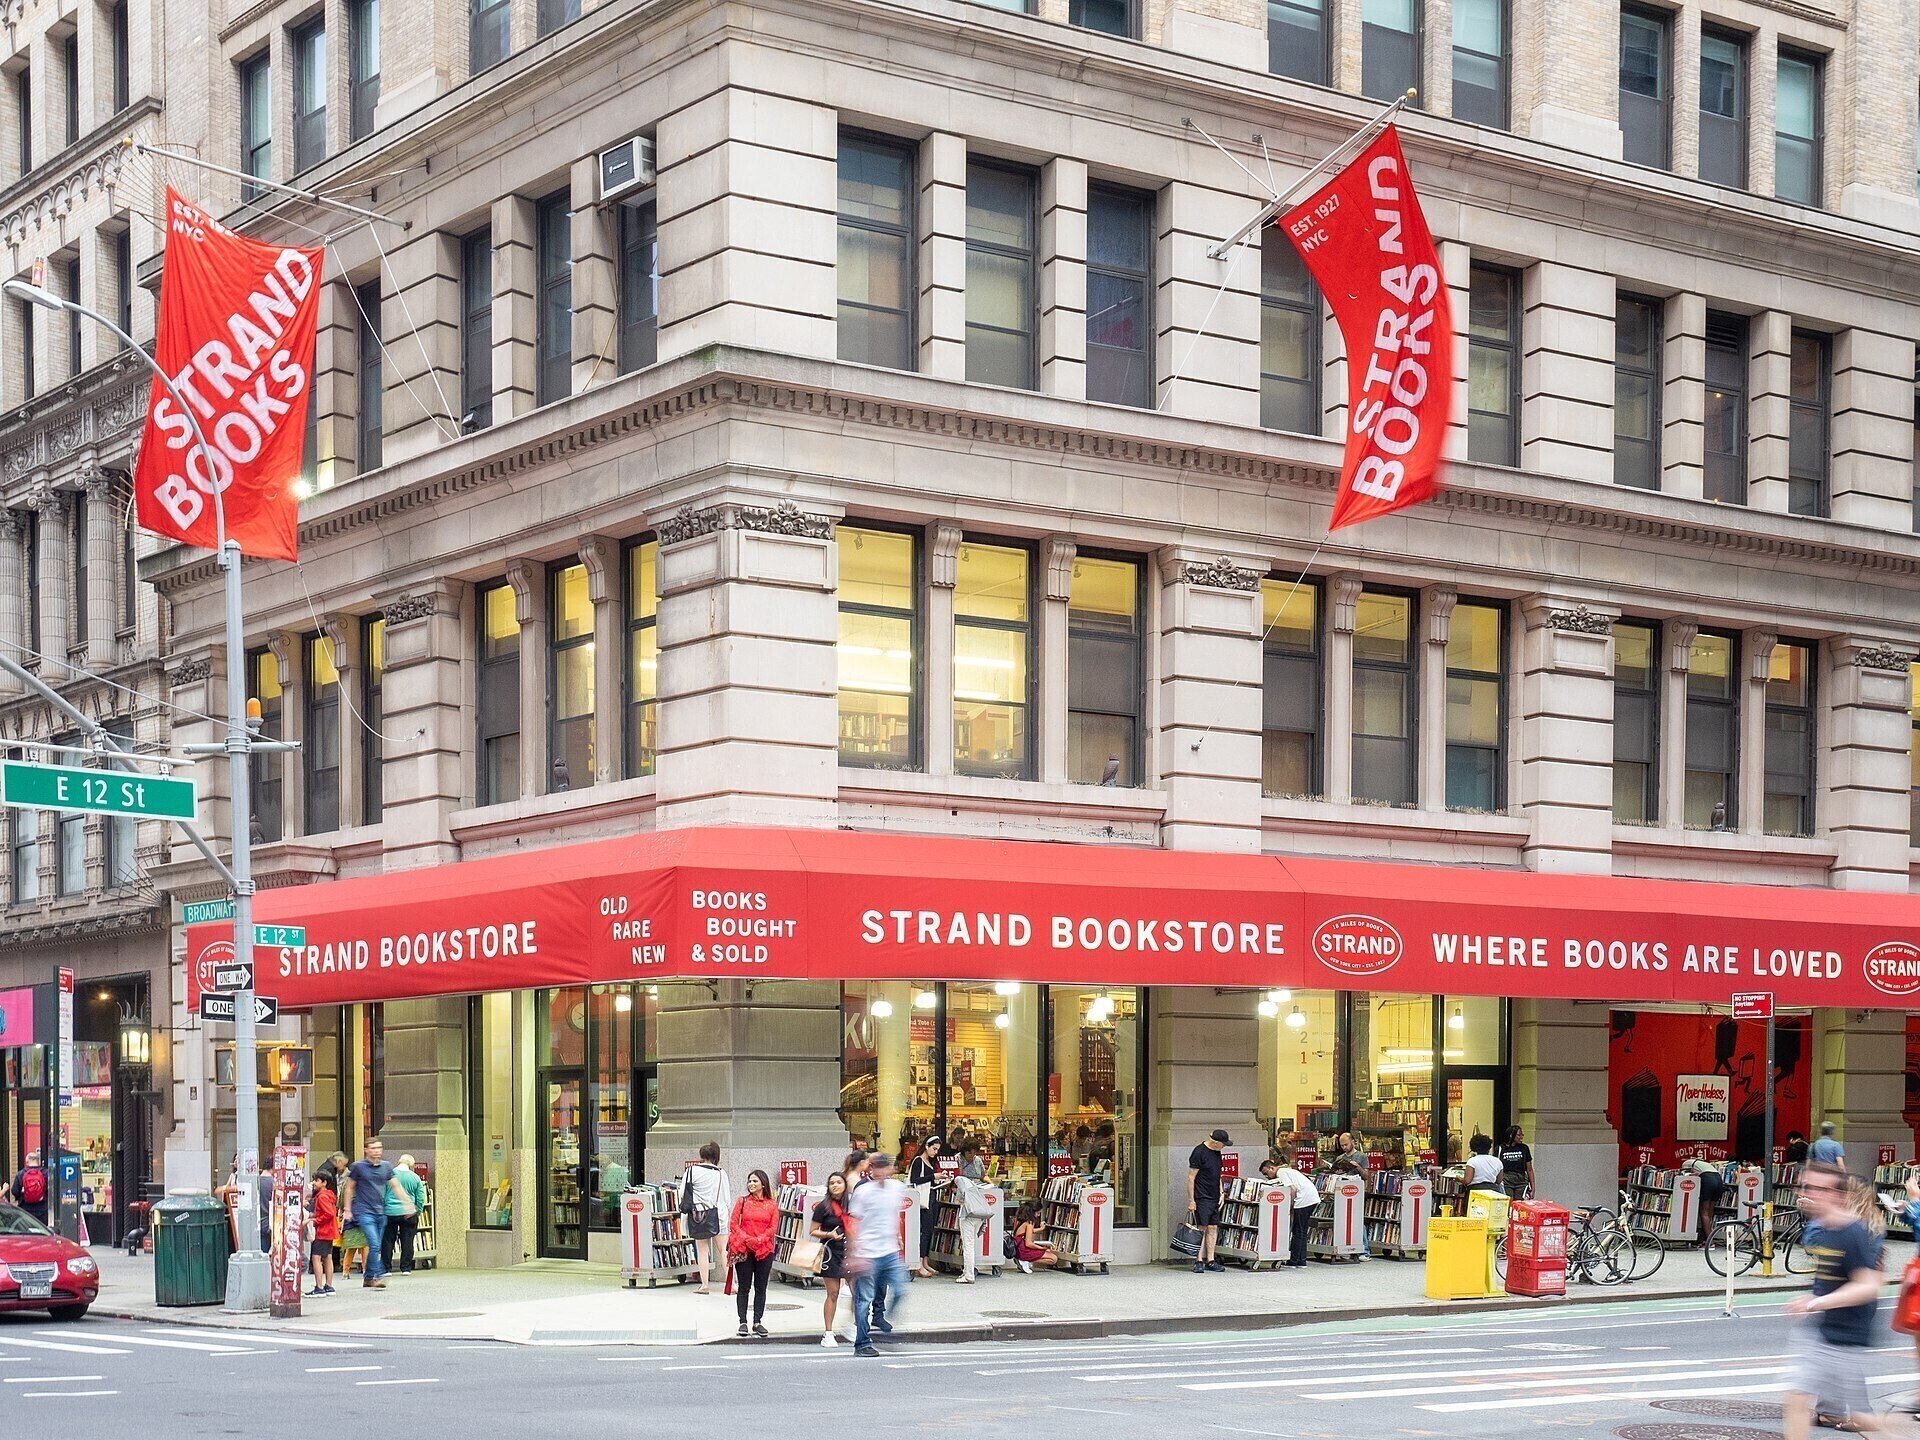 Strand Bookstore's exterior with red awnings and people browsing the outdoor bookshelves